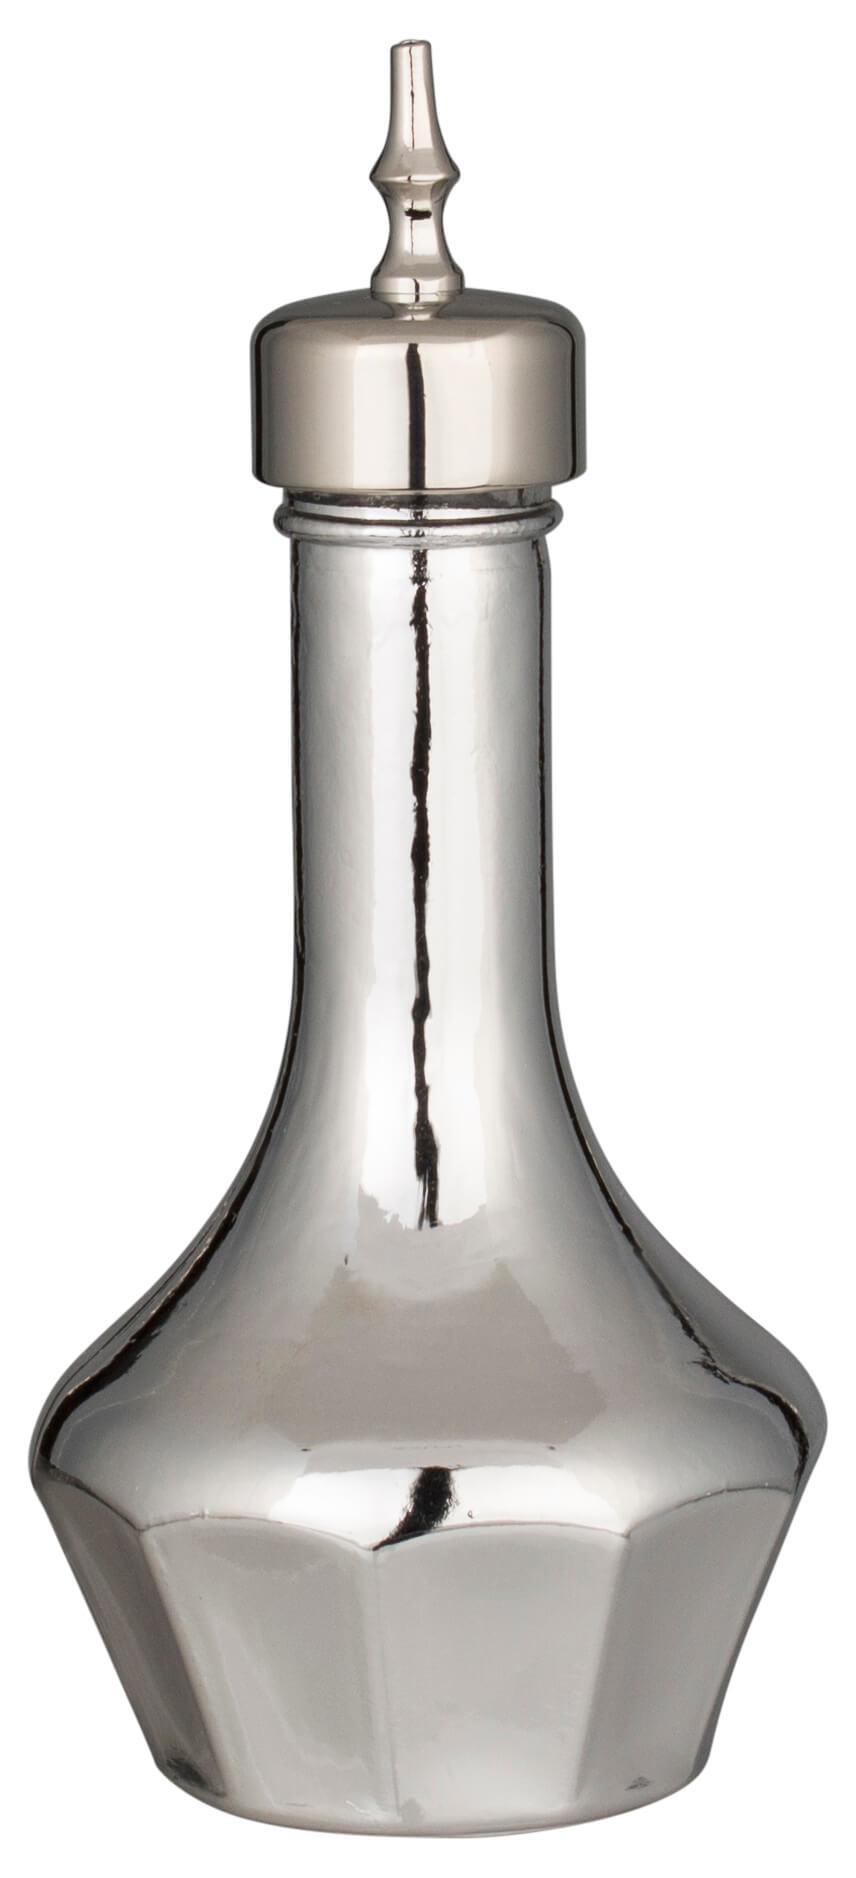 Bitters bottle Japan style, Prime Bar, silver-colored - 50ml